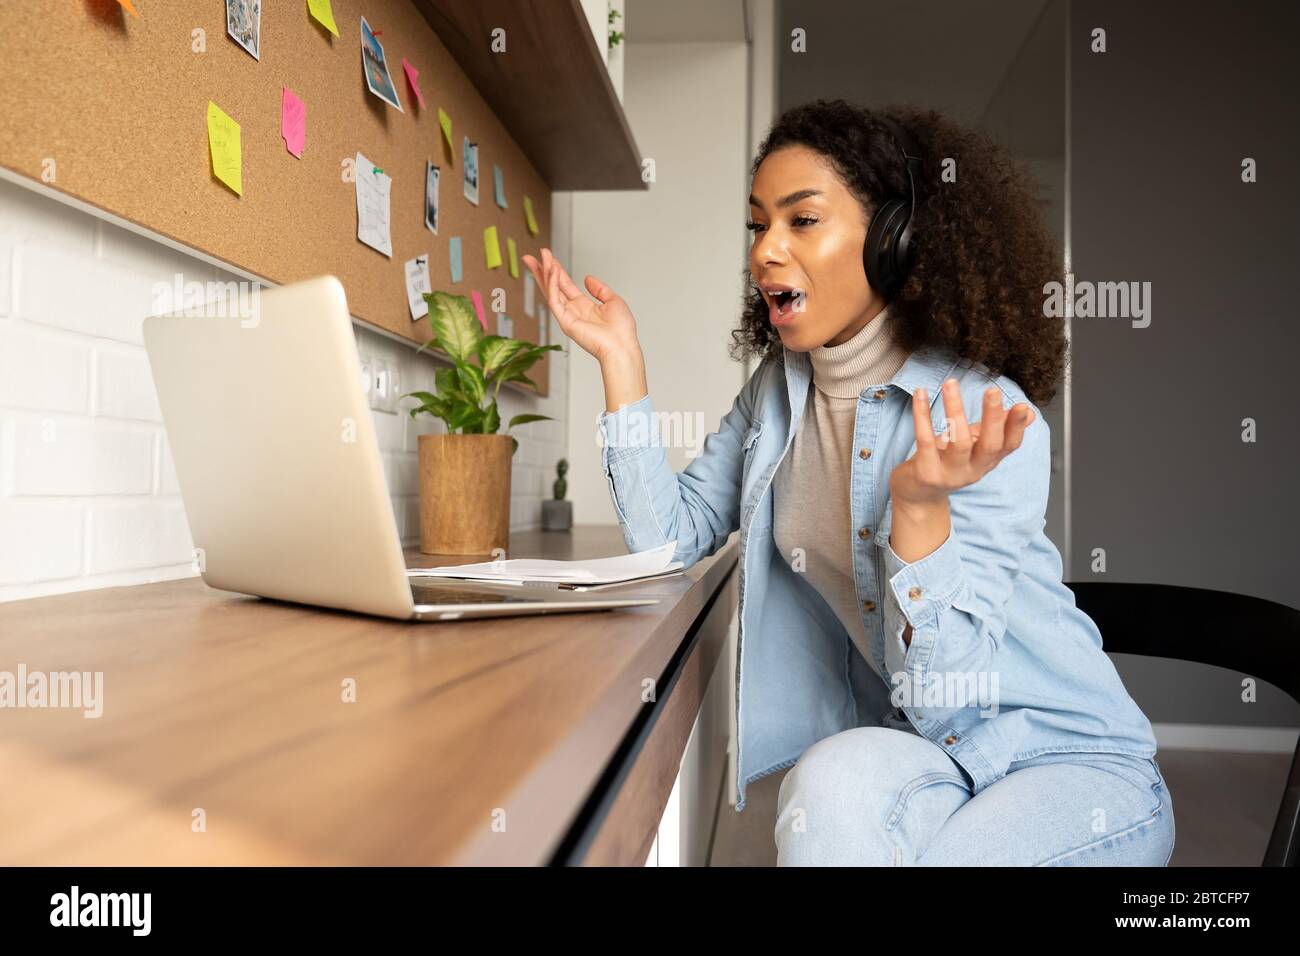 Funny surprised afro american woman wearing headphones video calling on laptop. Stock Photo